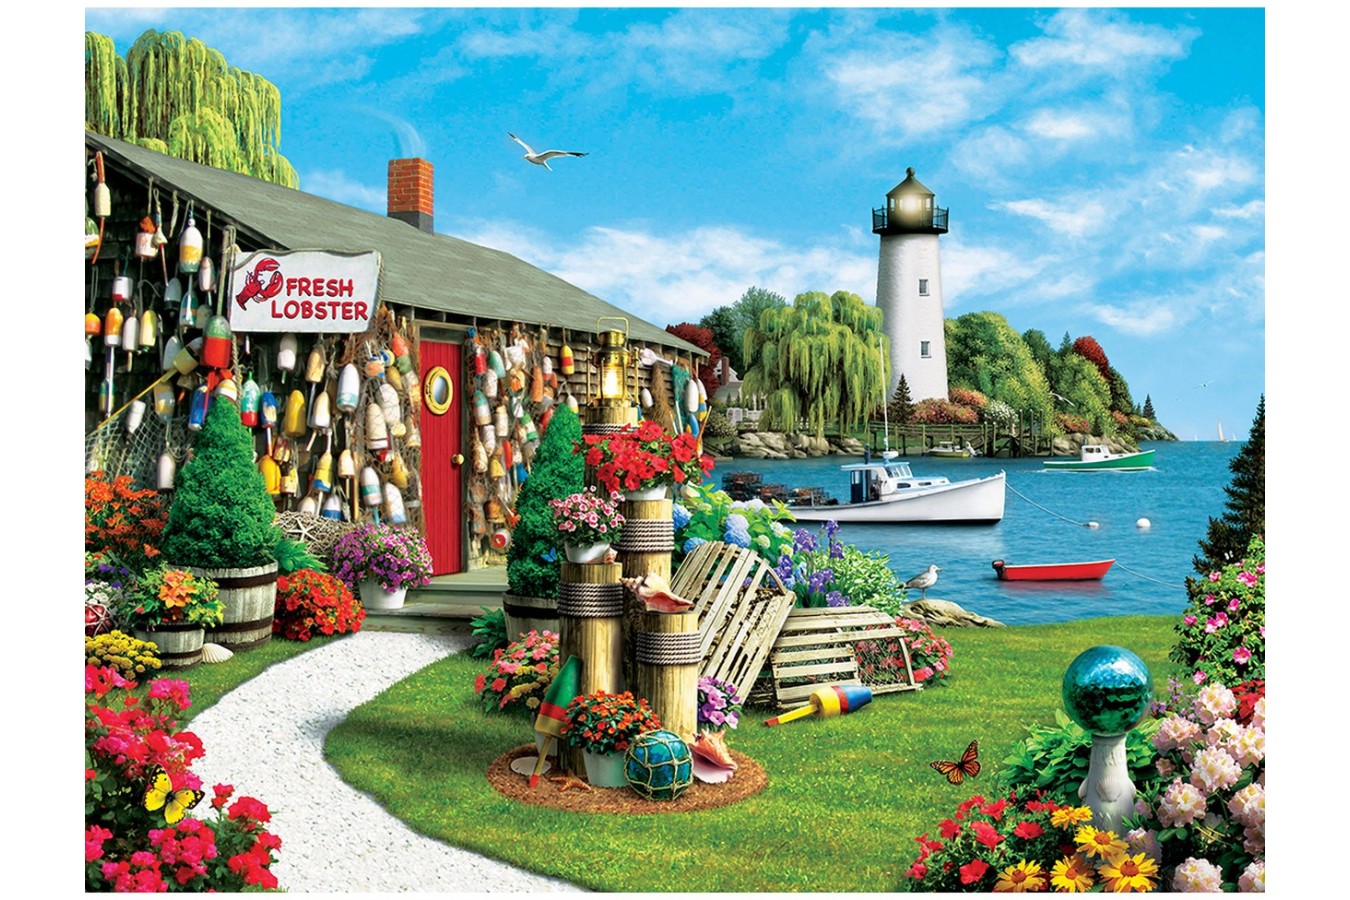 Puzzle Master Pieces - Lobster Bay, 300 piese XXL (Master-Pieces-31543)